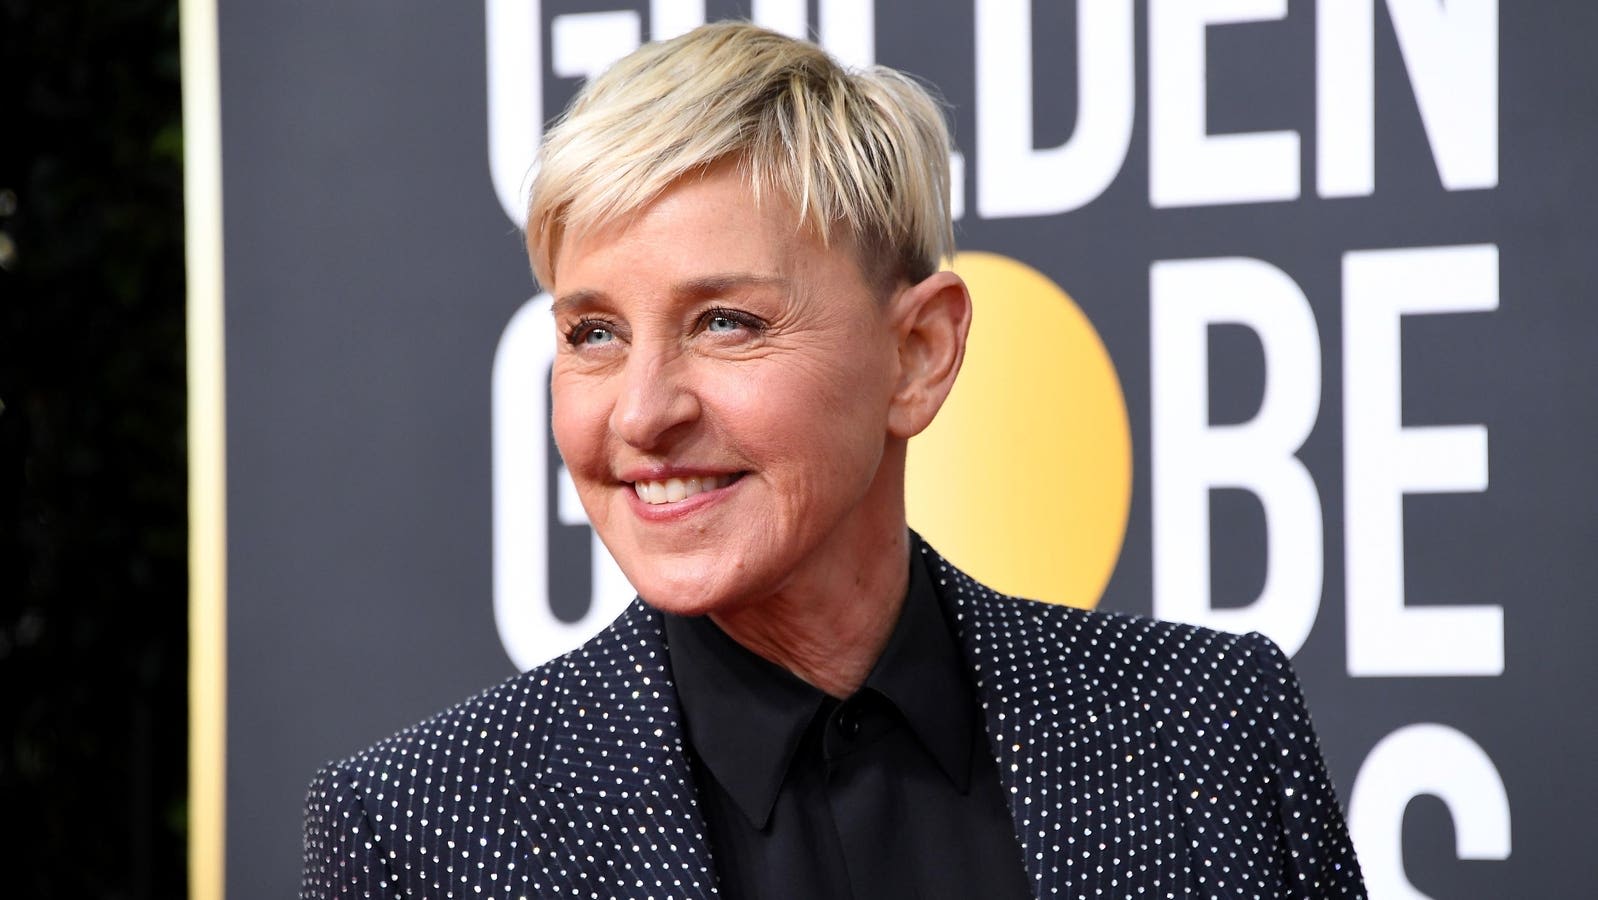 Ellen DeGeneres Cancels Shows Around The Country: ‘After My Netflix Special, I'm Done.’